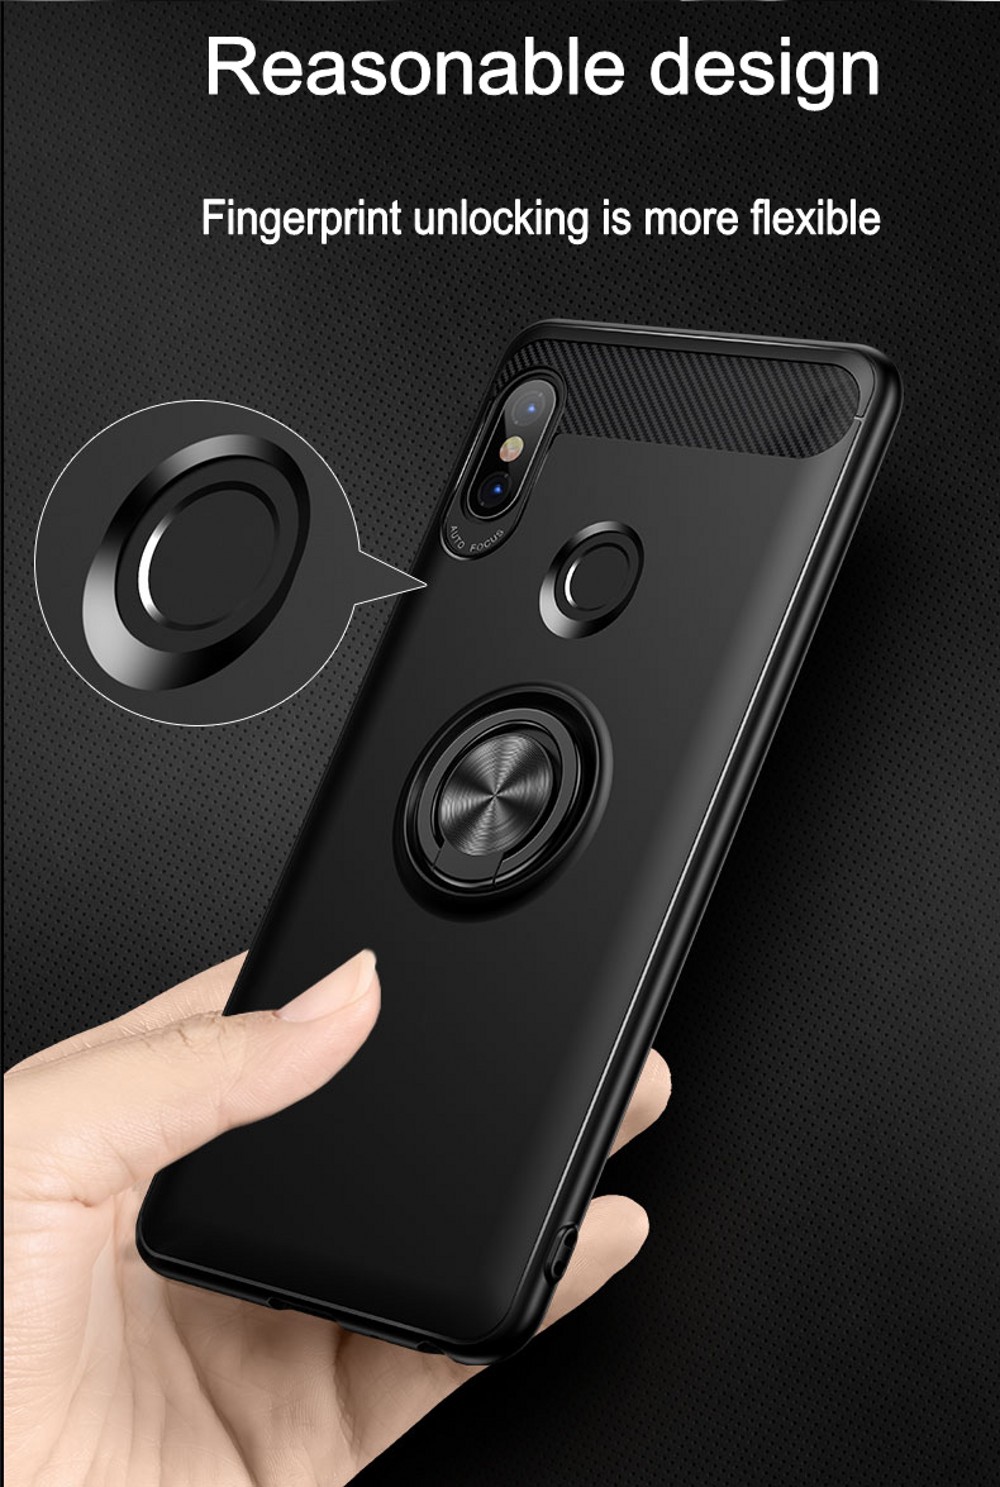 Bakeey-360deg-Adjustable-Metal-Ring-Kickstand-Magnetic-PC-Protective-Case-for-Xiaomi-Redmi-Note-5-No-1305910-2